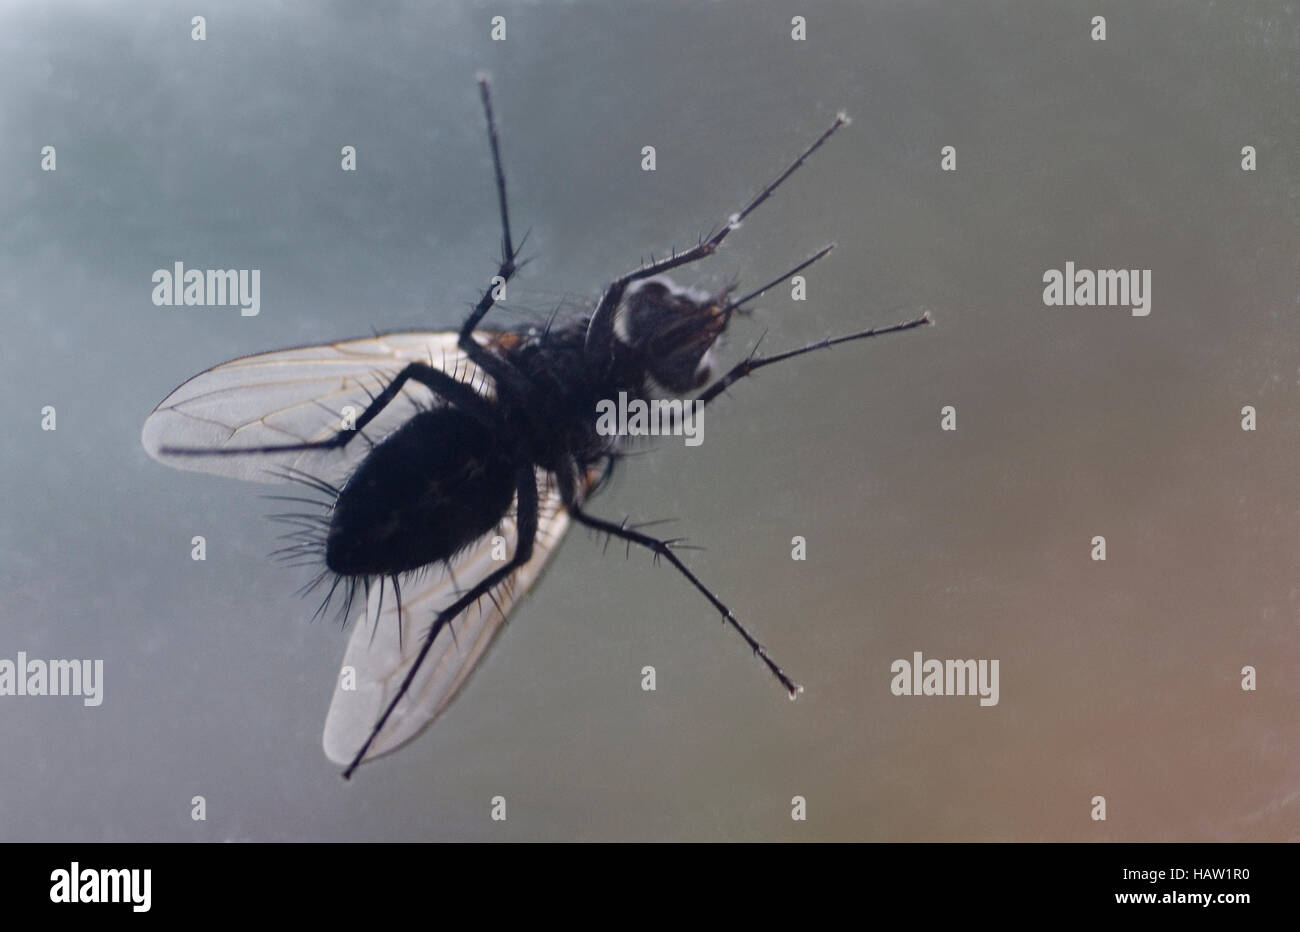 Ventral view of fly on window Stock Photo